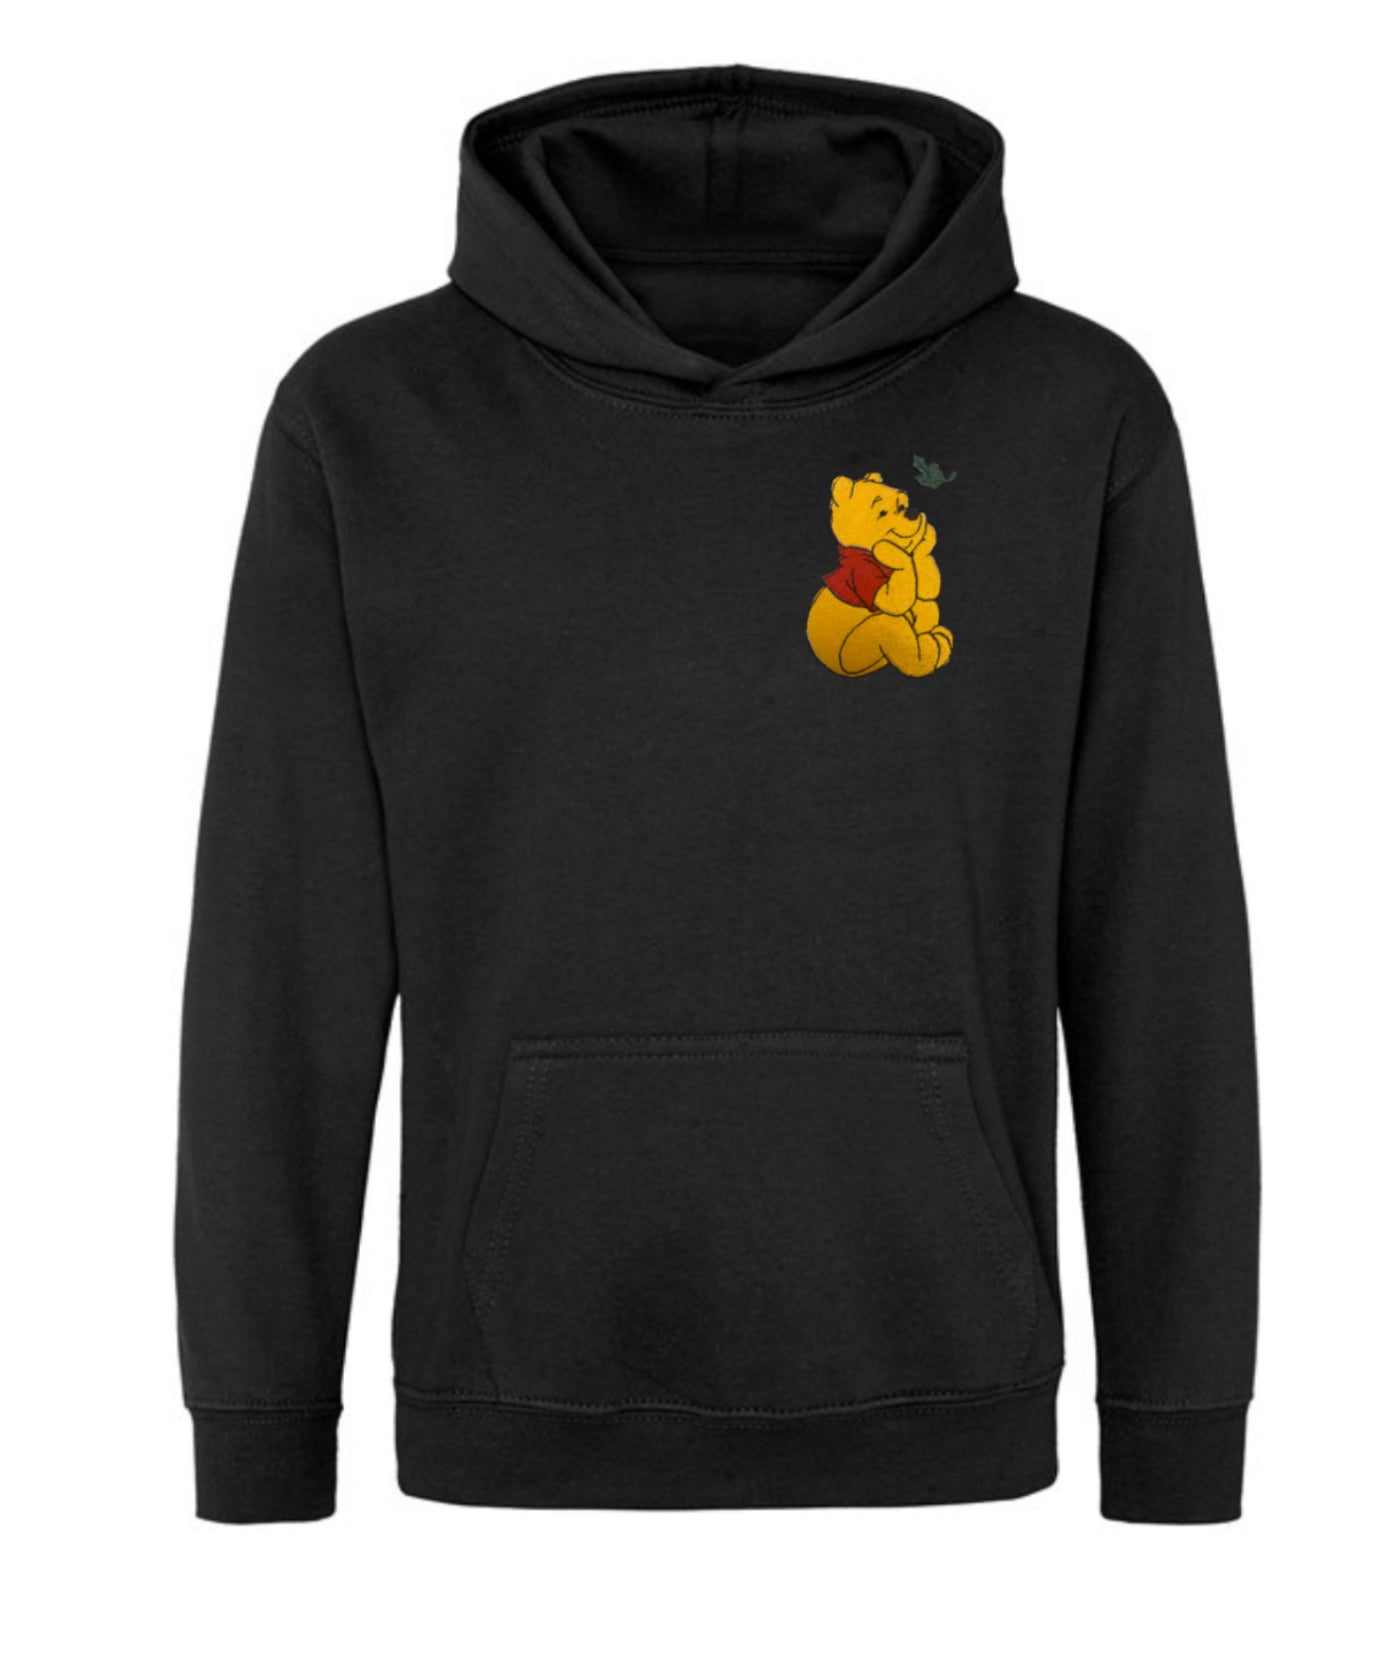 Winnie The Pooh Black Hoodie For Adults and Children